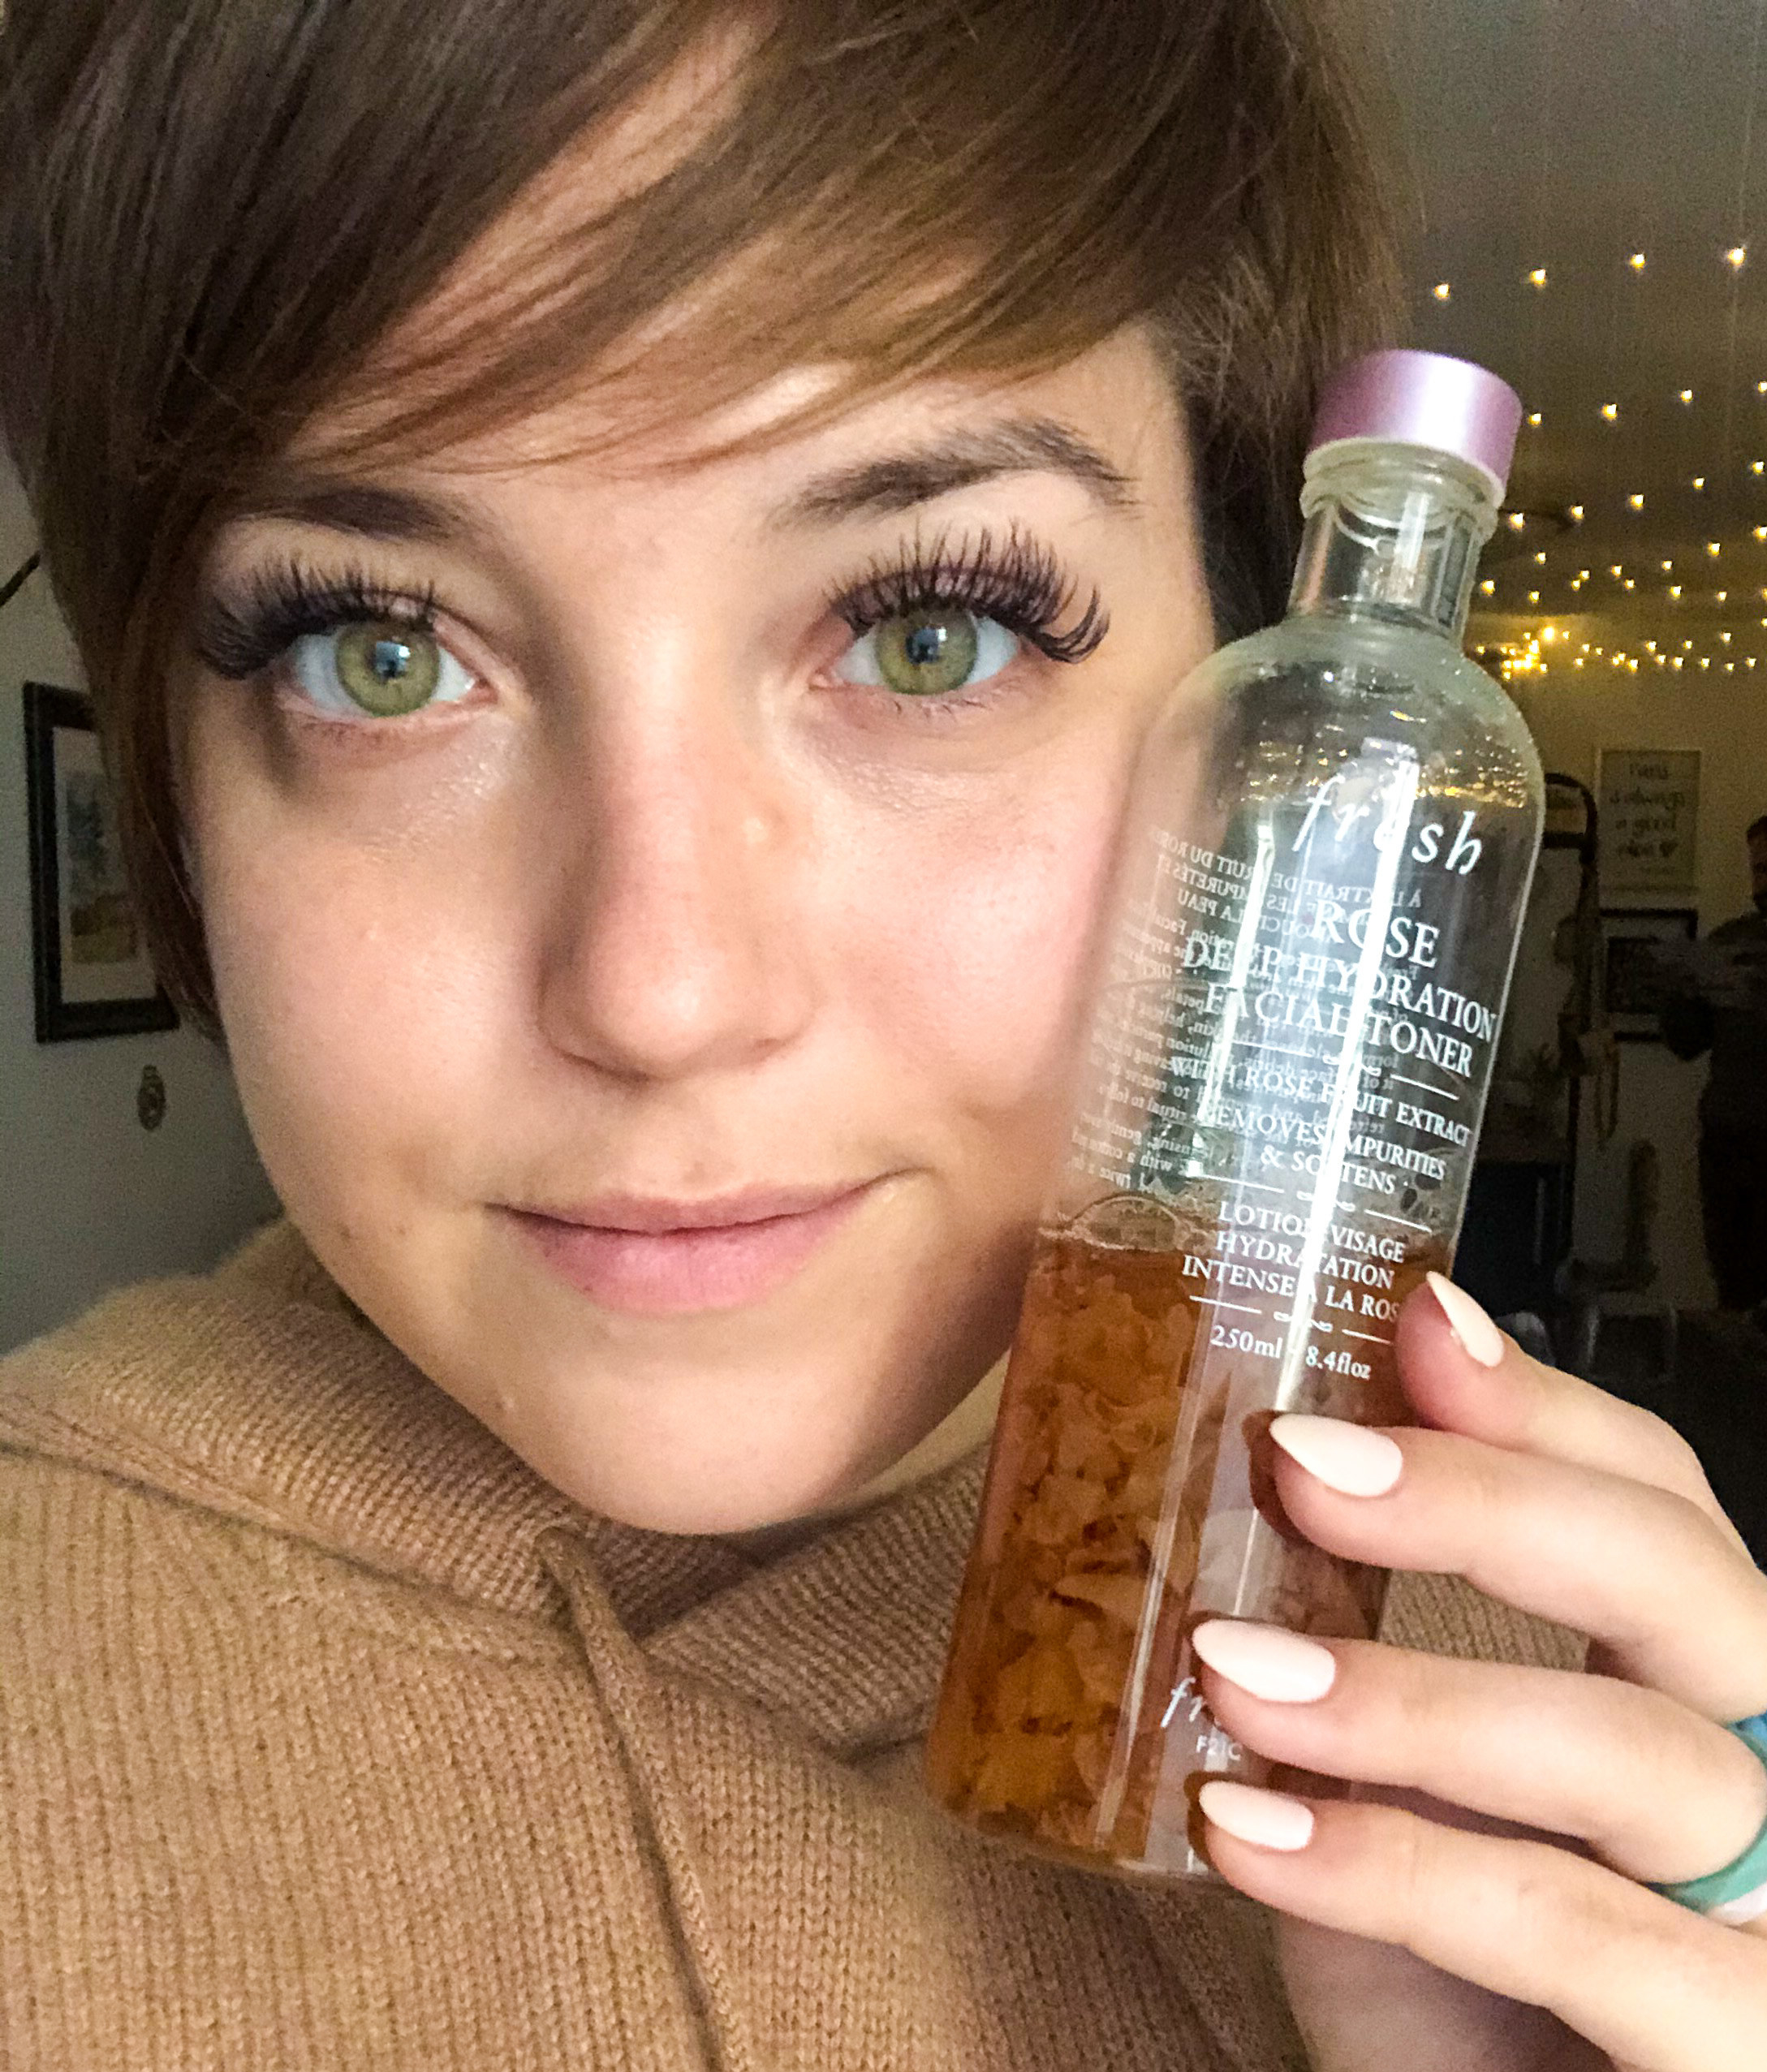 A person holds a half-empty bottle of the toner against their face